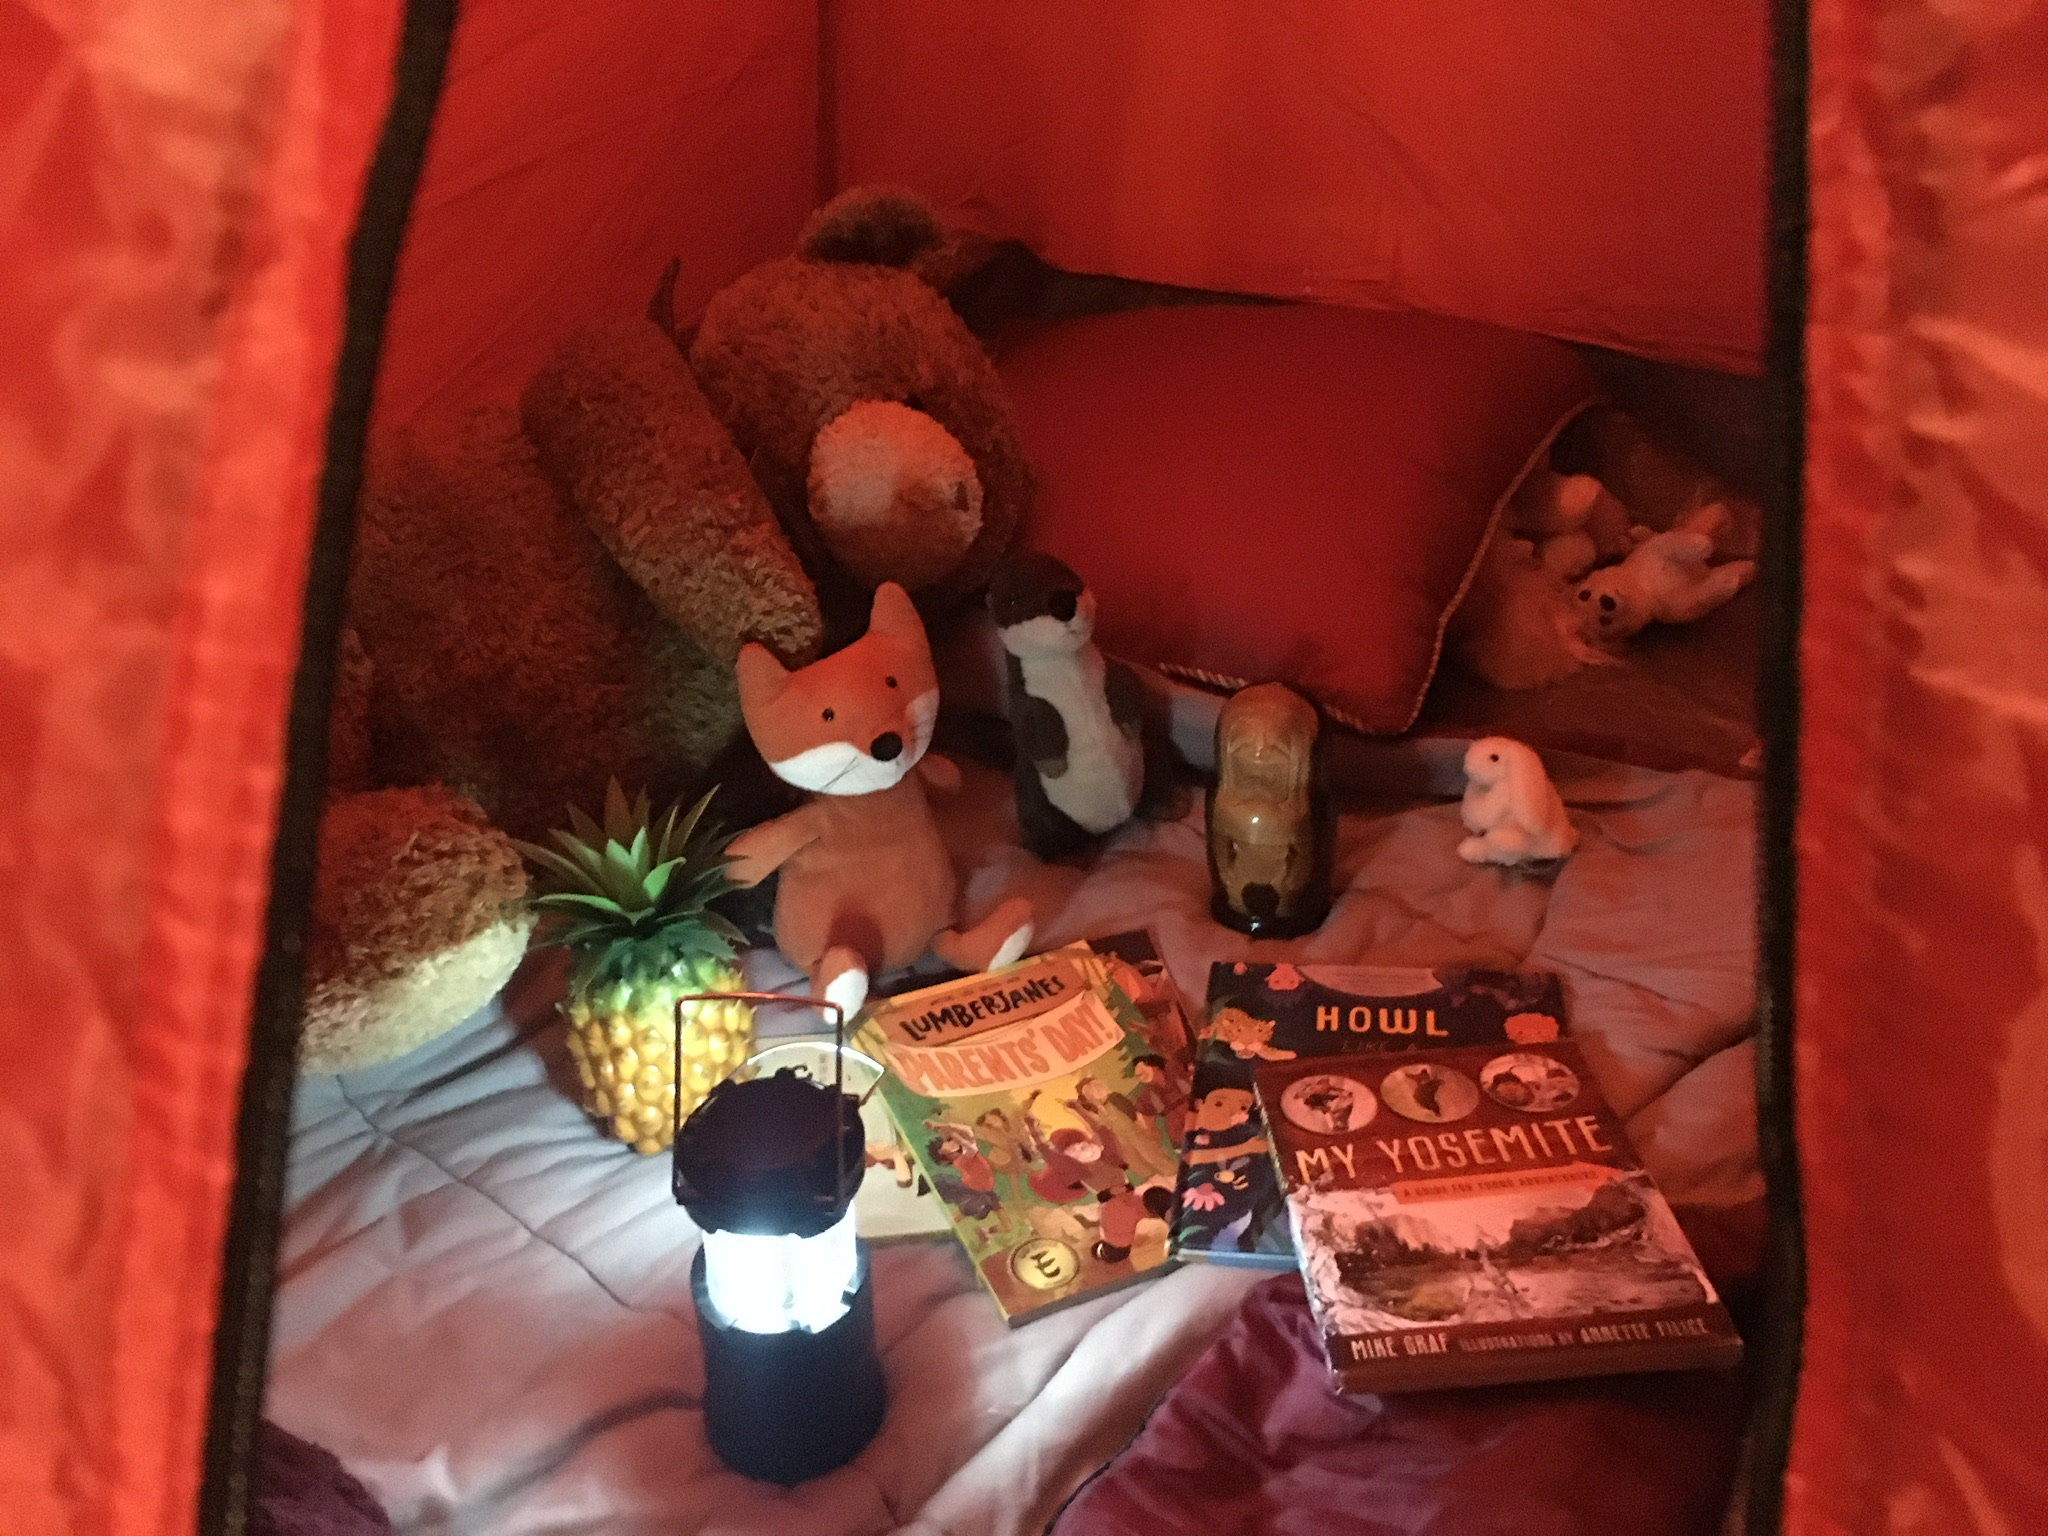 Inside a tent, with a sleeping bag, stuffed animals, a lantern, and some books